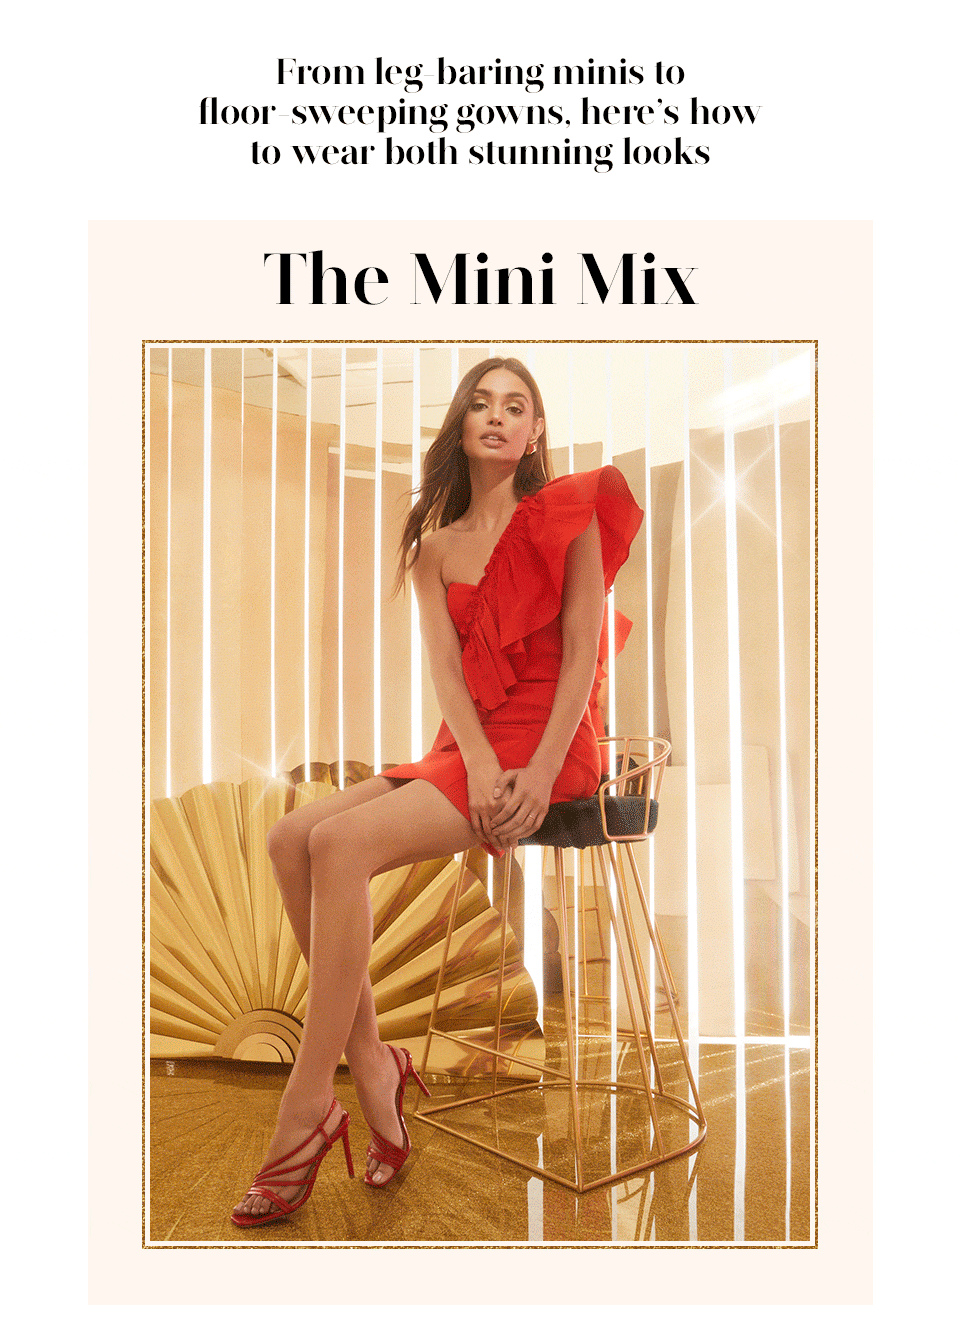 From leg-baring minis to floor-sweeping gowns, here’s how to wear both stunning looks. The Mini Mix.